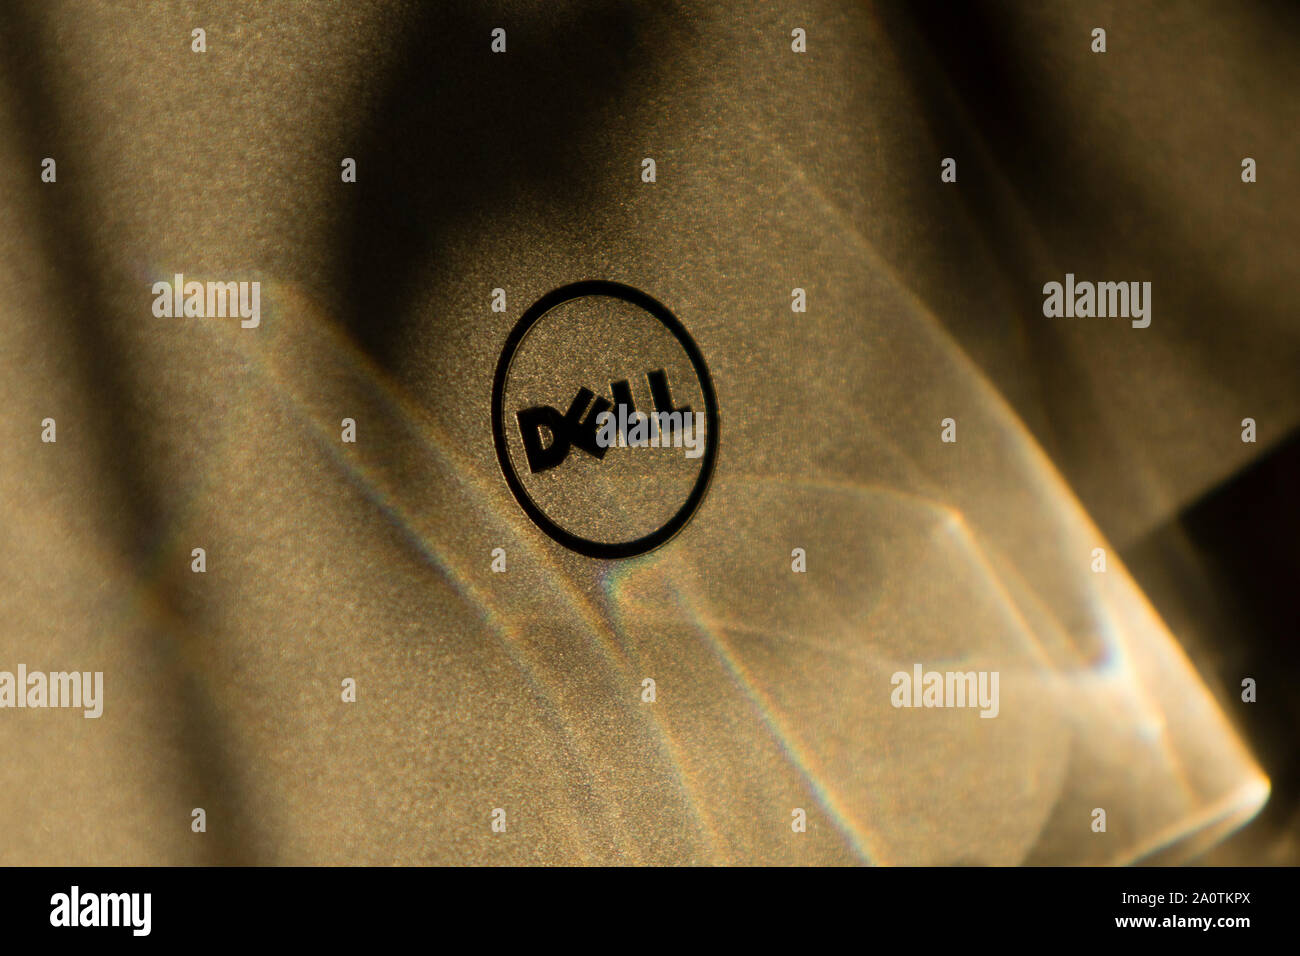 Top view of a Dell XPS ultrabook's aluminum lid with logo washed with lights of a prism. Stock Photo